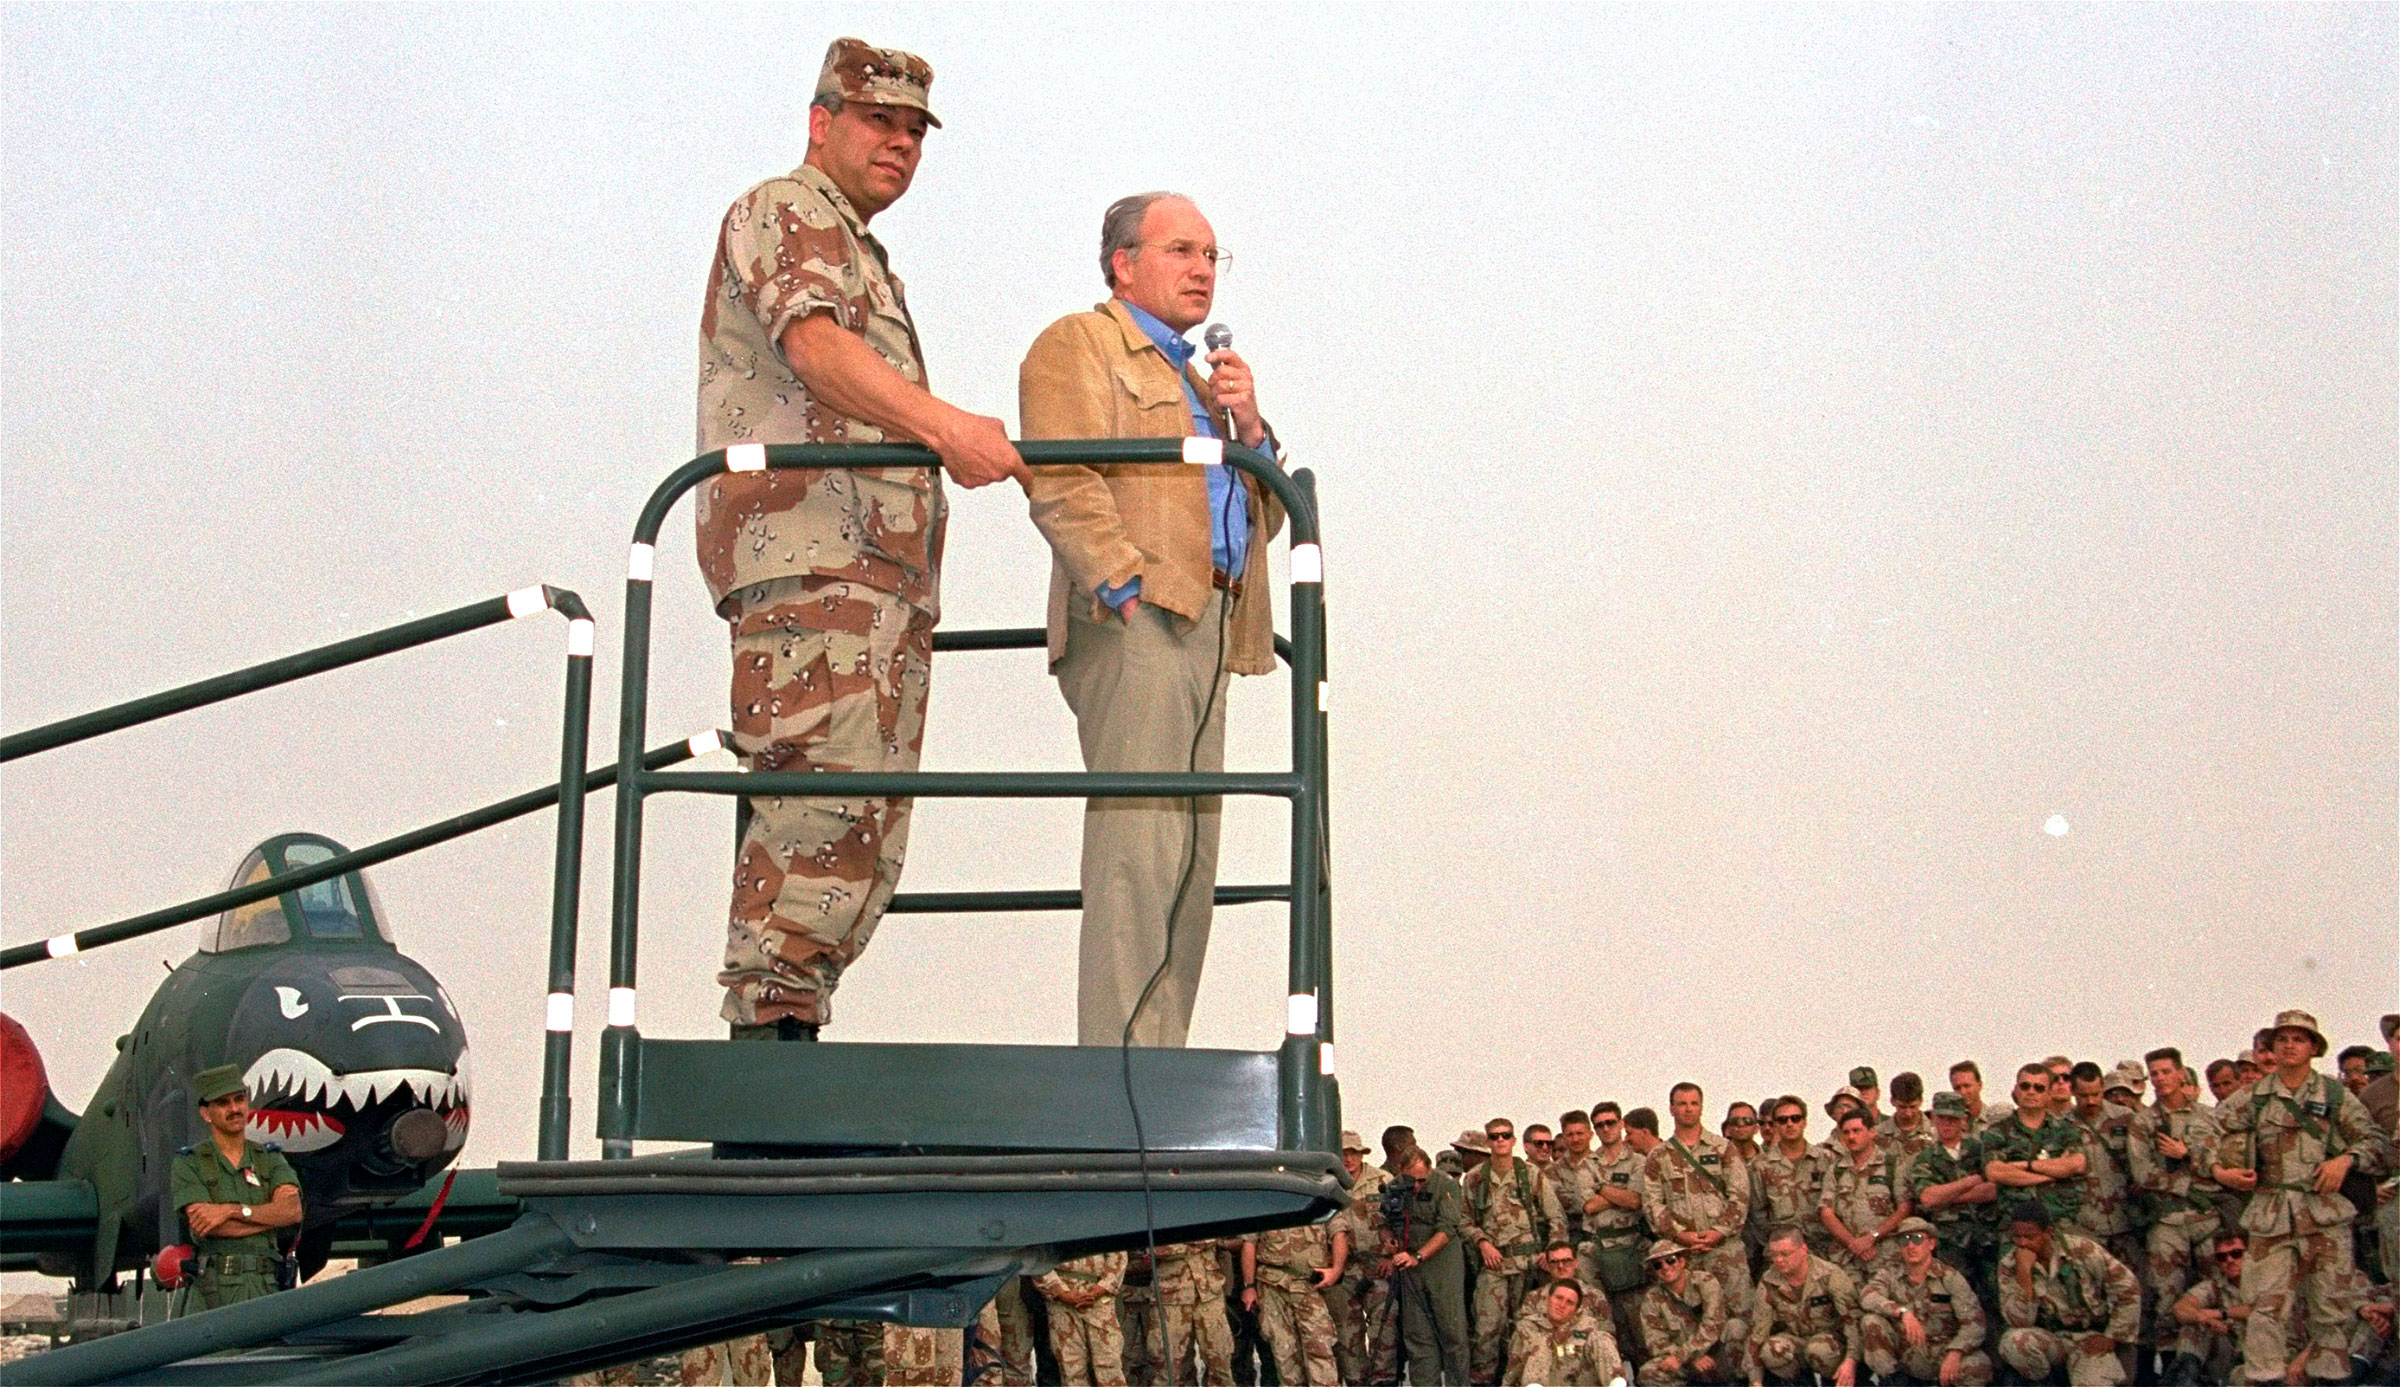 Secretary of Defense Dick Cheney, right, and Gen. Colin Powell, chairman of the Joint Chiefs of Staff, speak to members of the 354th Tactical Fighter Wing from Myrtle Beach, S.C. at their air base in Saudi Arabia on Dec. 12, 1990. (Bob Daugherty—AP)